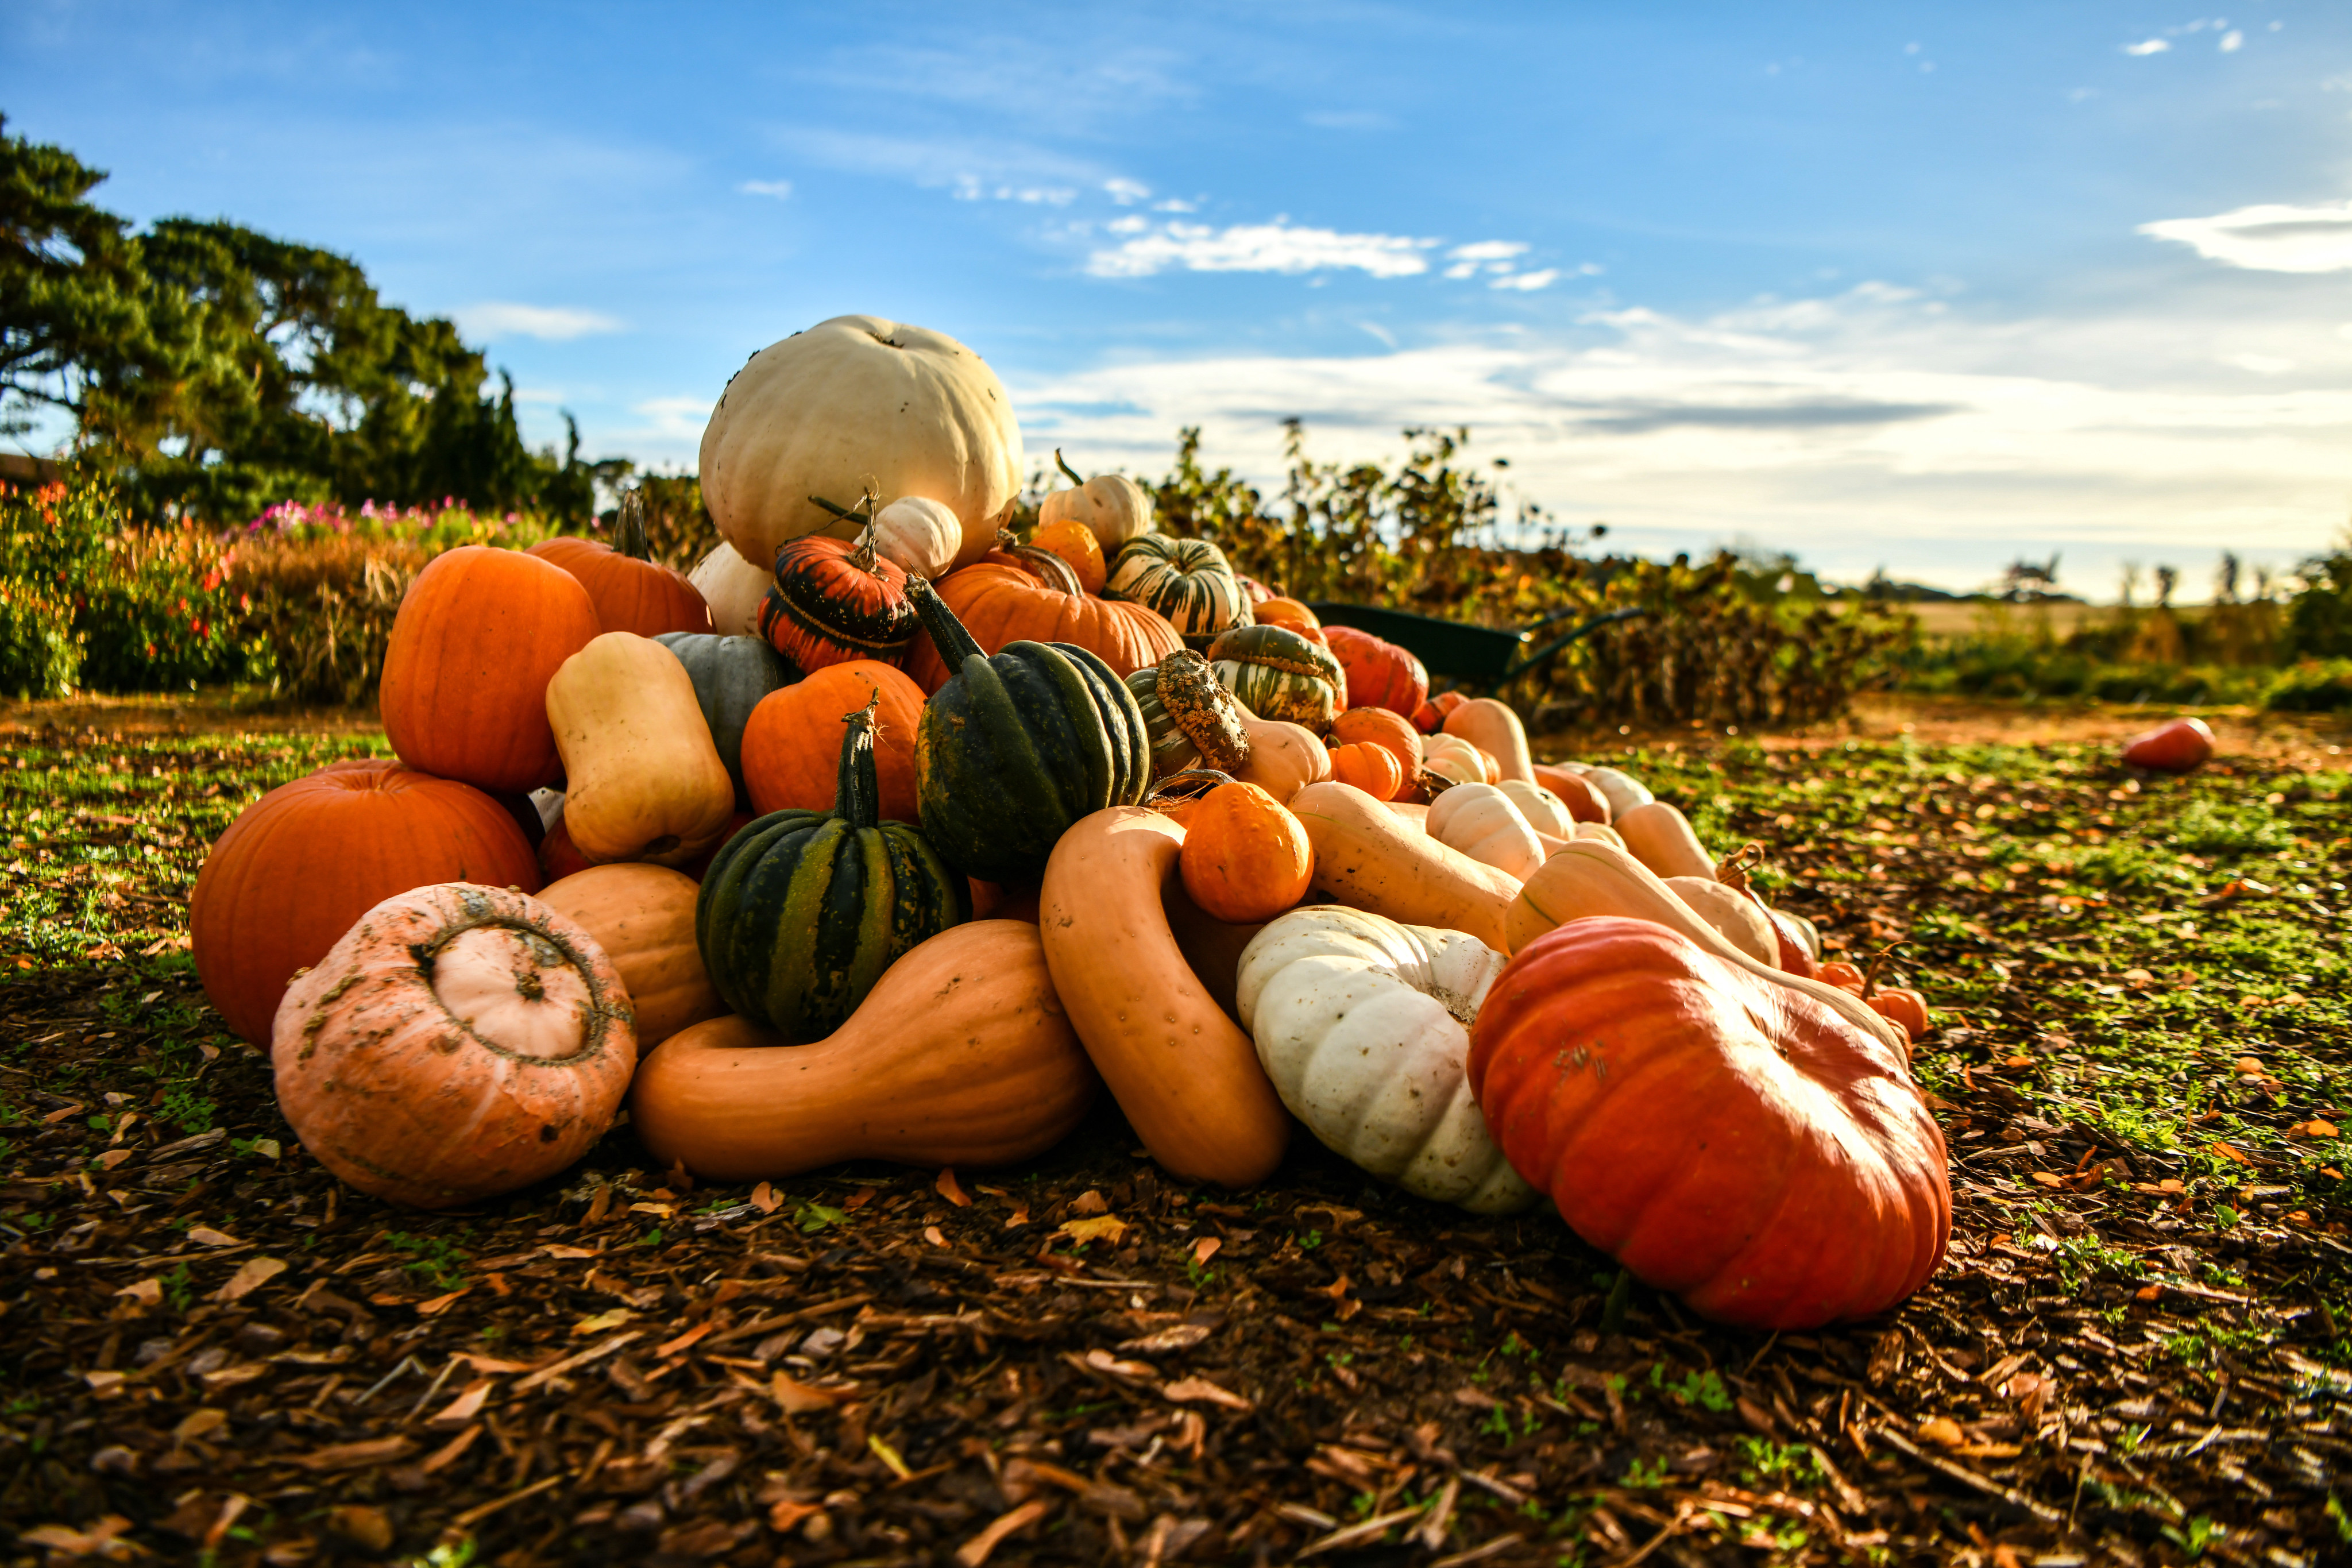 Pumpkins are high in fibre but low in calories, which means they can help you feel full without increasing your overall food intake. Photo: Shutterstock